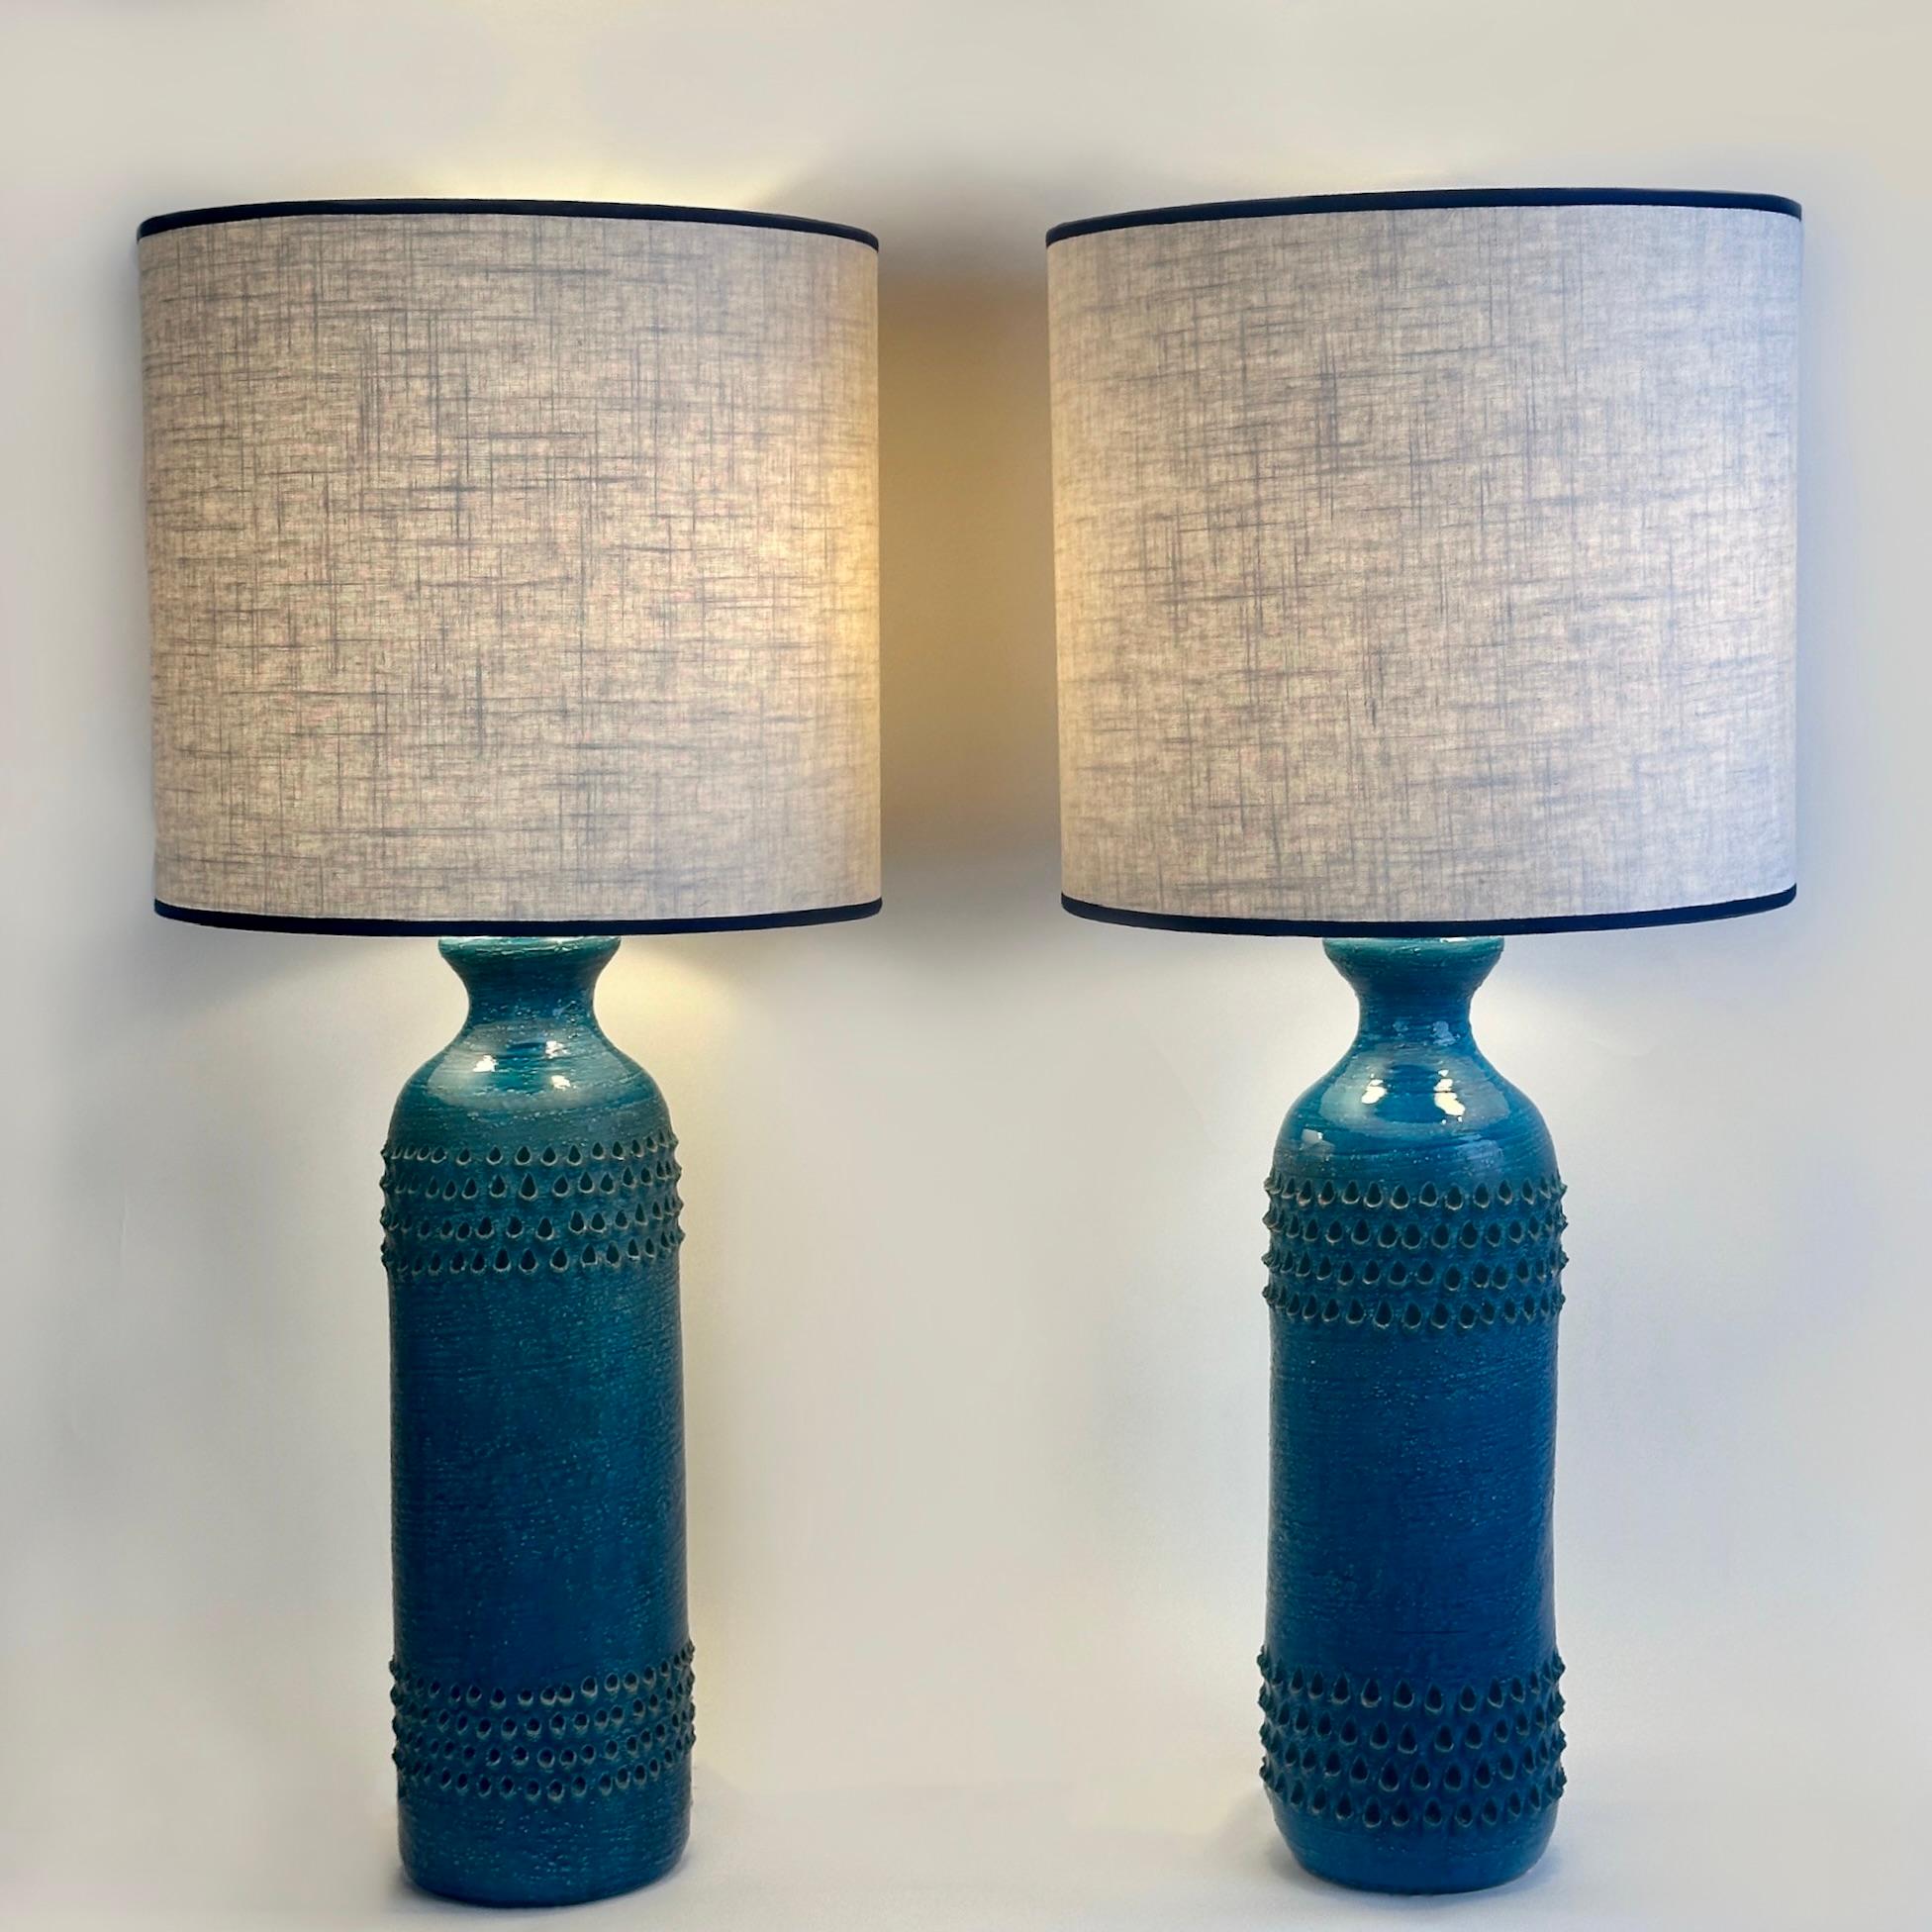 Stunning pair of handmade Rimini Blue table lamps signed on the bottom with cotton lampshades (size: 38 diam. x 35 H cm.). Two E27 light bulbs each. 

Aldo Londi (1911-2003) was a painter, sculptor and primarily ceramist. He created objects that are